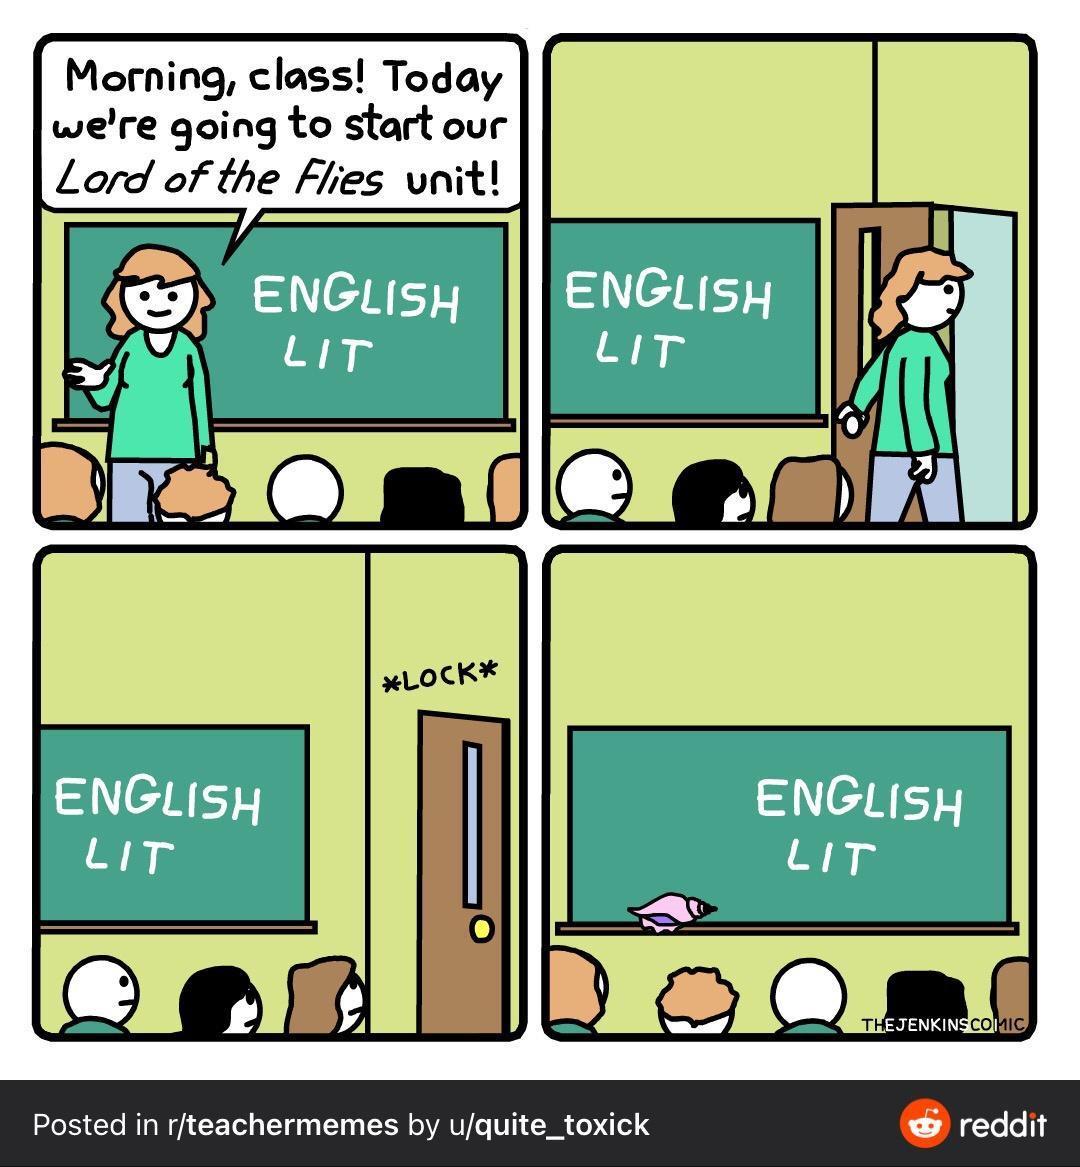 funny pics and memes - cartoon - Morning, class! Today we're going to start our Lord of the Flies unit! English Lit English Lit Lock English Lit Posted in rteachermemes by uquite_toxick English Lit The Jenkins Comic reddit